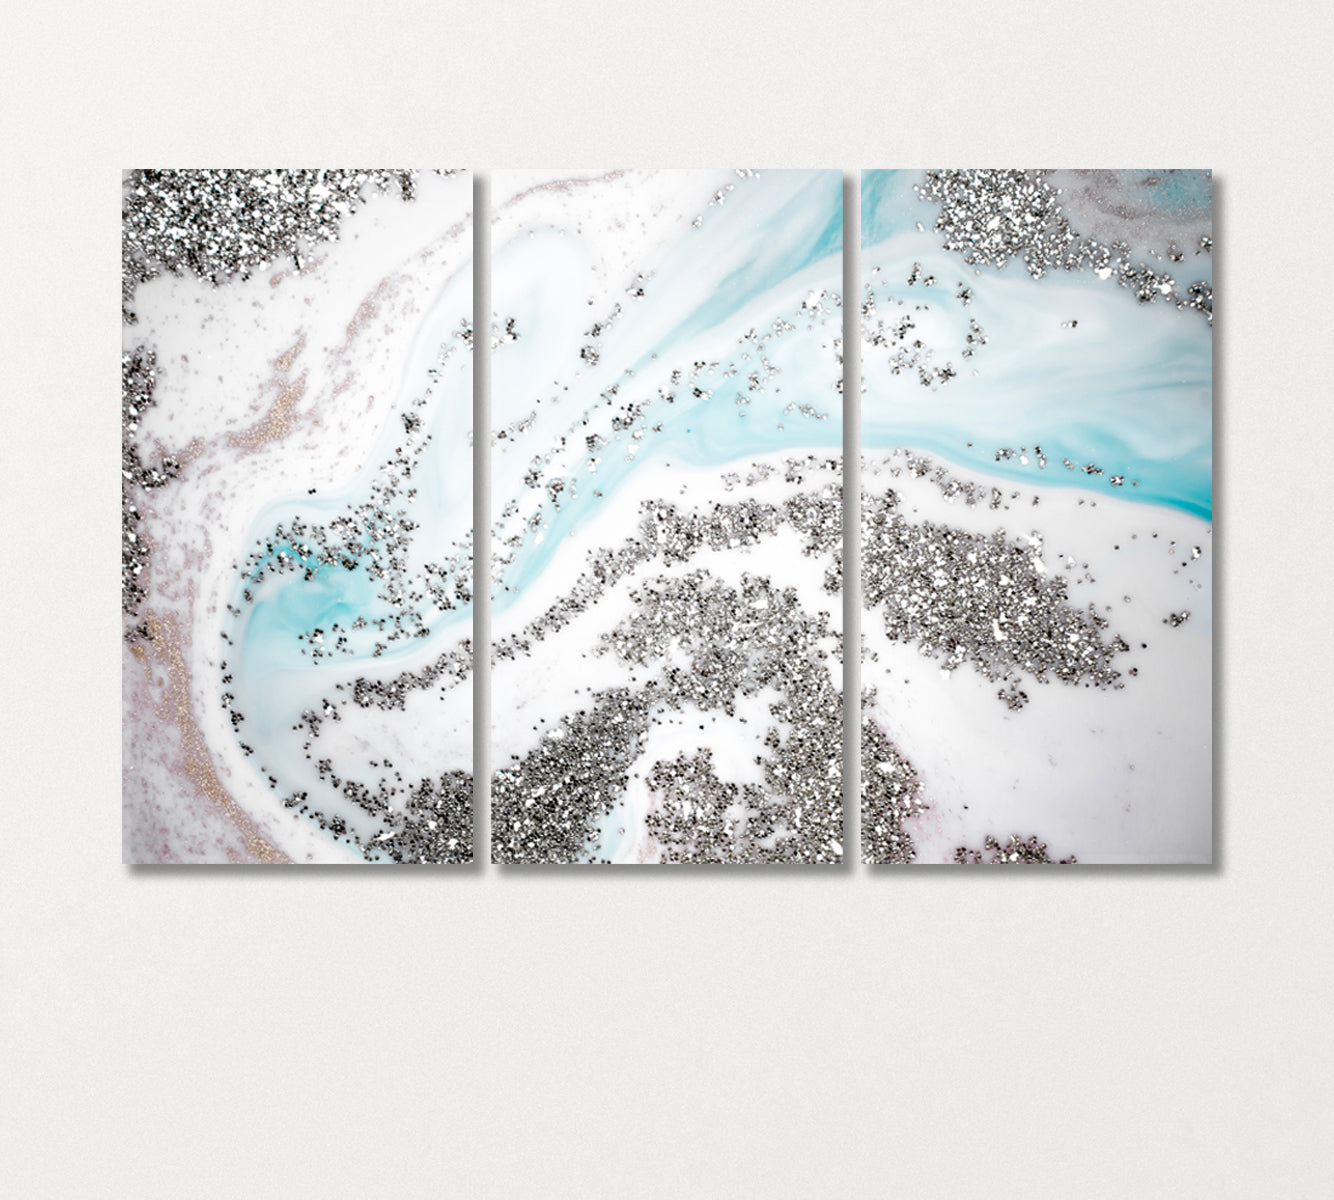 Abstract Liquid Marble in Pastel Colors Canvas Print-Canvas Print-CetArt-3 Panels-36x24 inches-CetArt